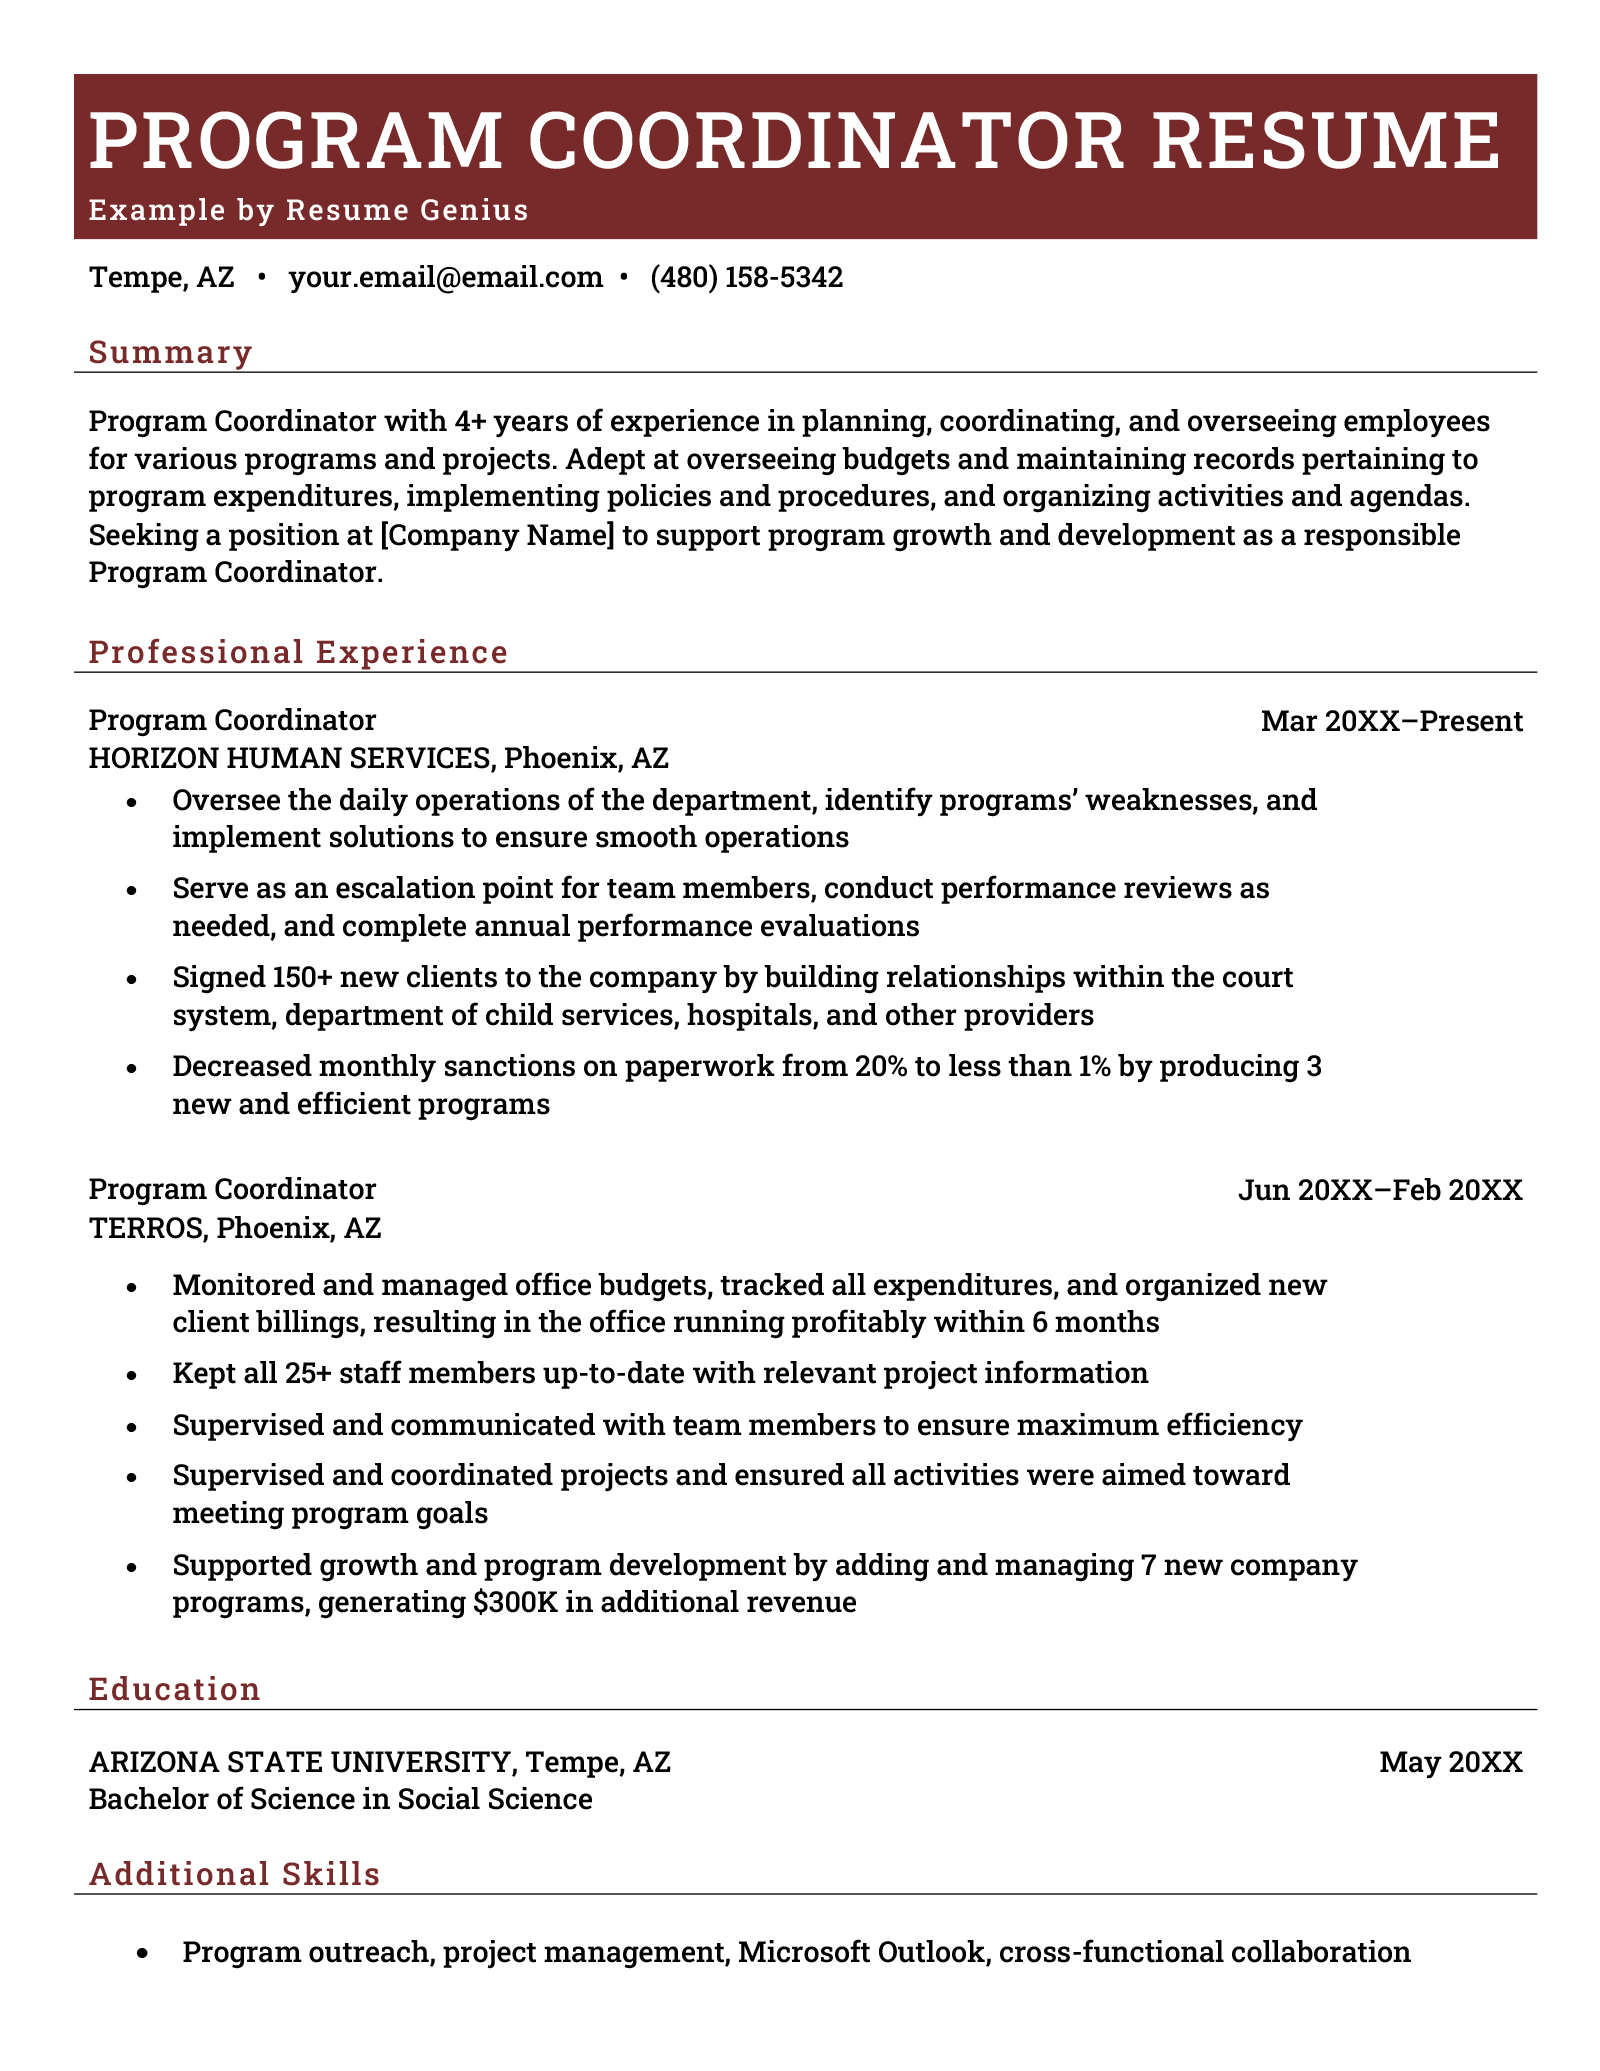 A program coordinator resume sample on a template with a brick red resume header and white font to highlight the applicant's name and contact details, followed by their professional experience, education, and additional skills